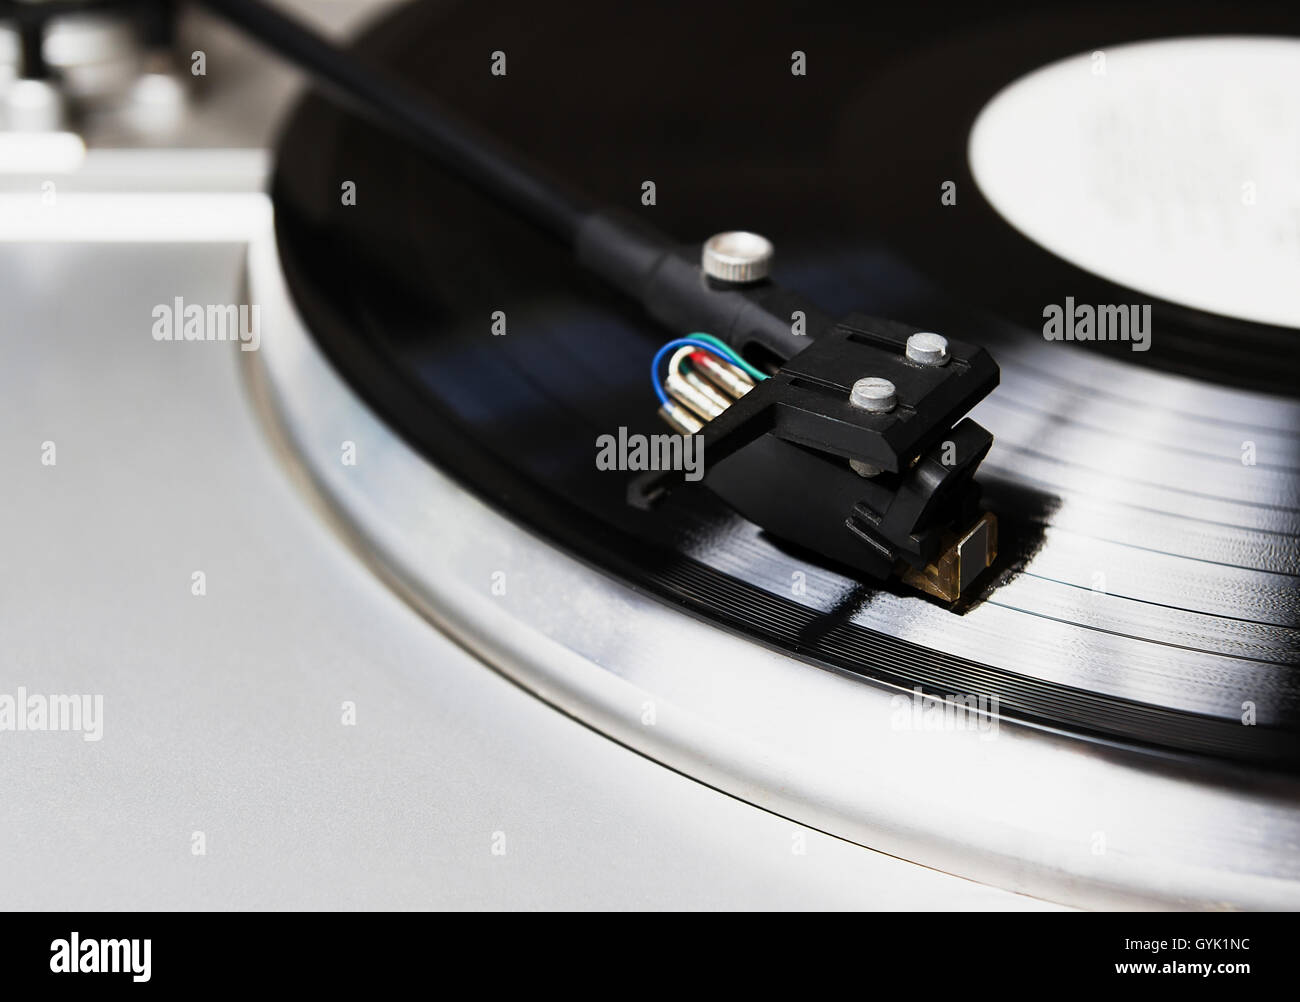 Turntable playing vinyl record with music. Useful equipment for DJ, nightclub and retro hipster theme or audio enthusiast. Stock Photo